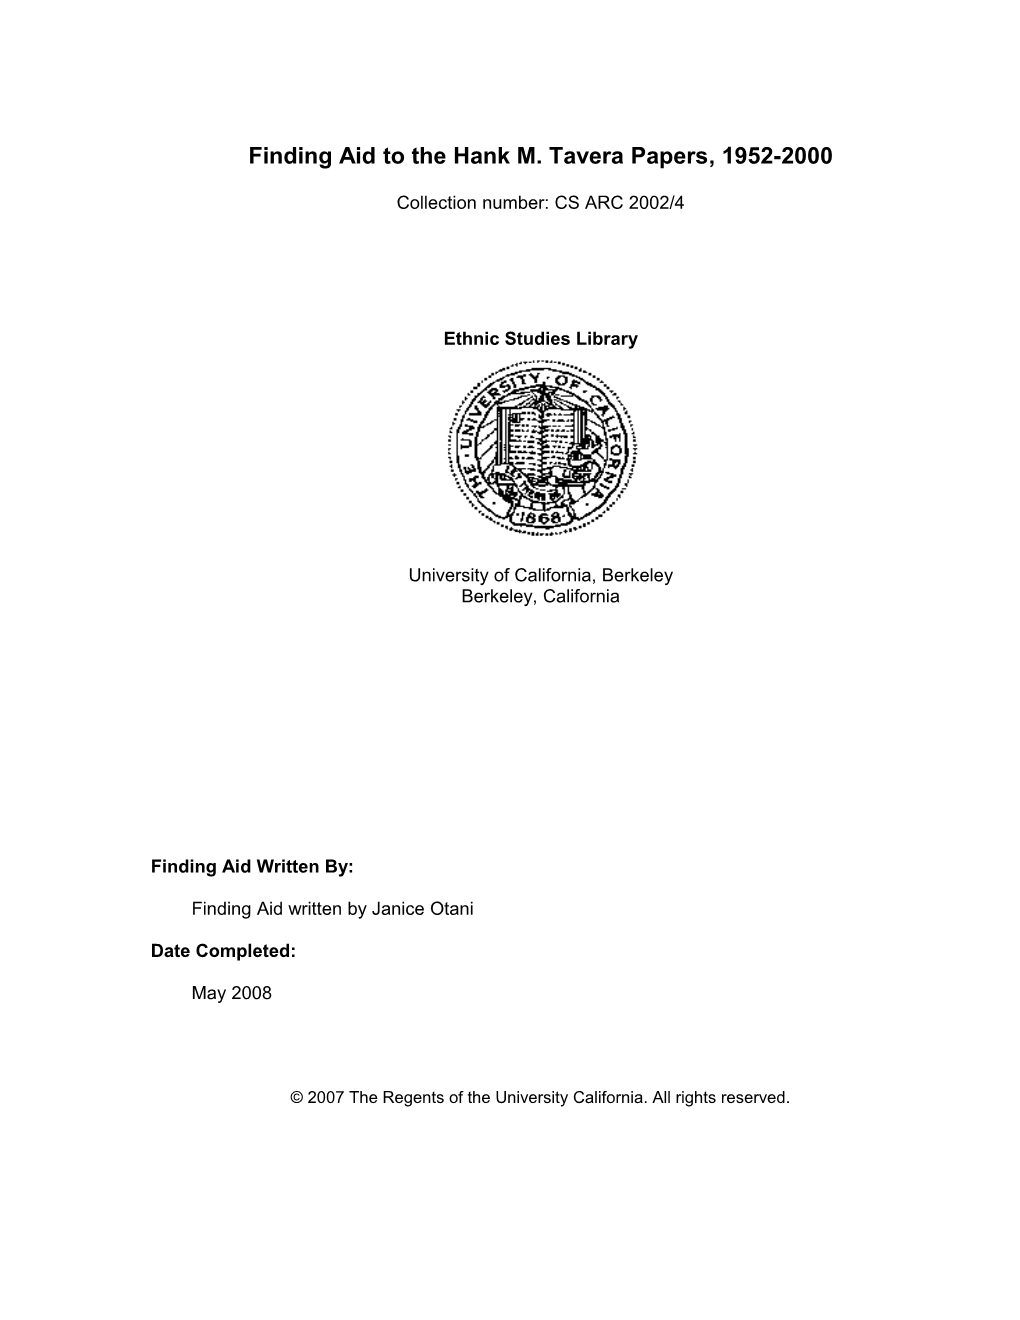 Finding Aid to the Hank M. Tavera Papers, 1952-2000